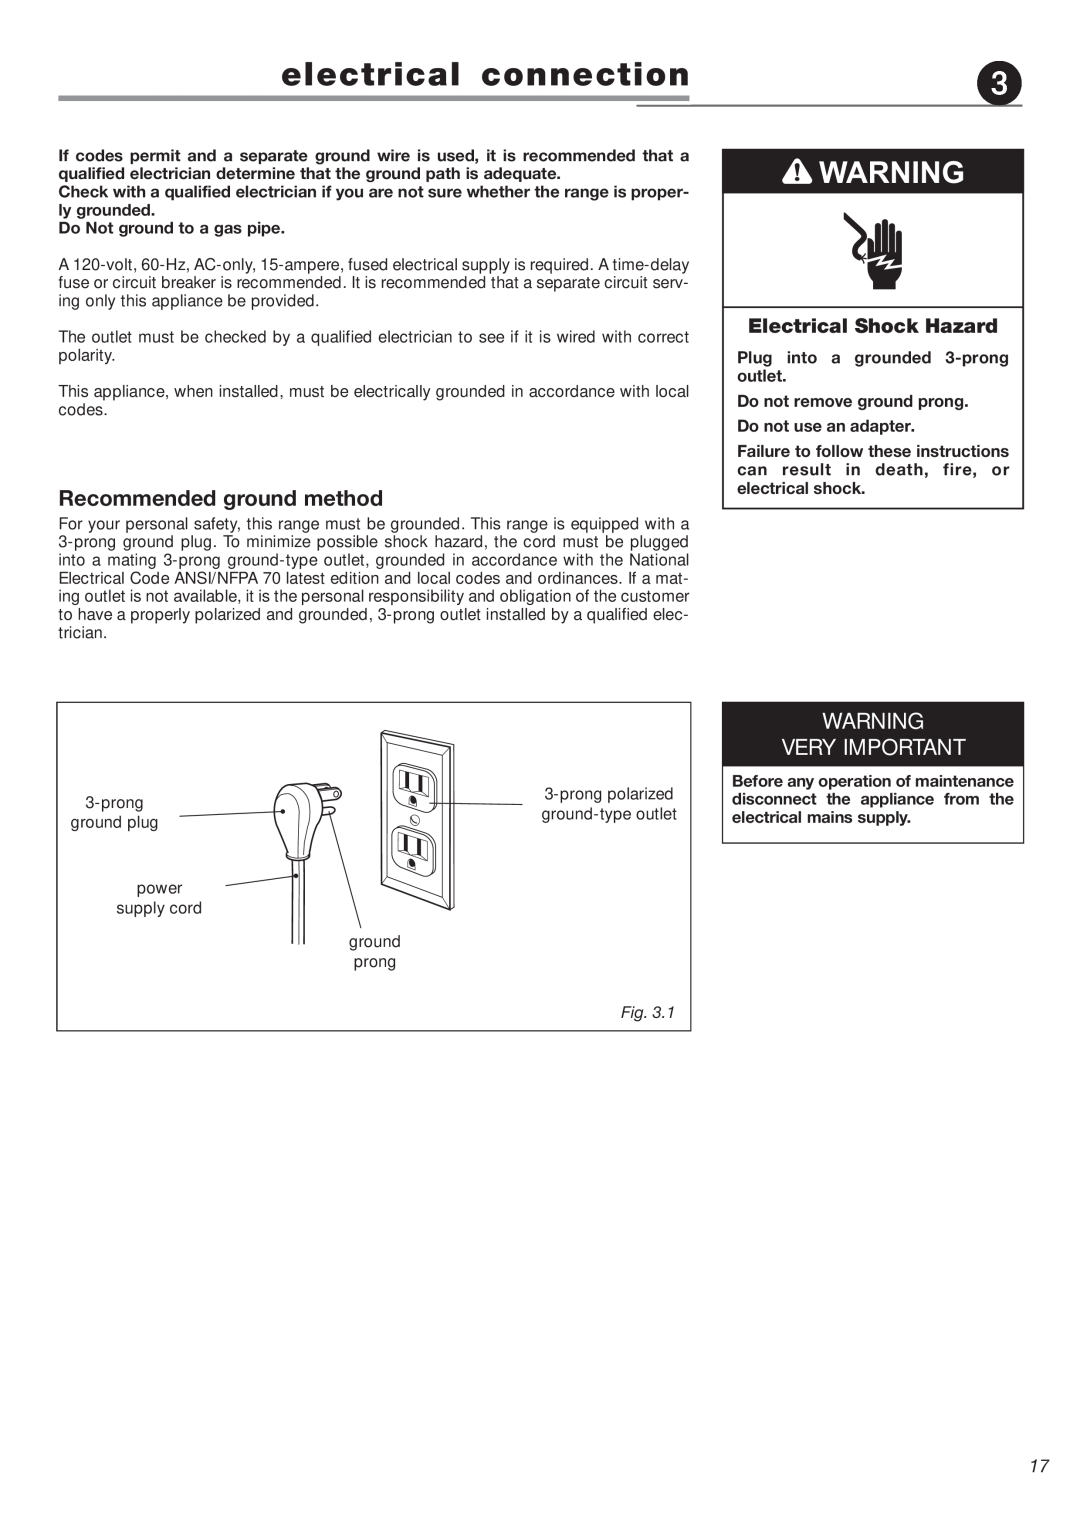 DeLonghi DEFSGG 24 SS installation instructions electrical connection, Recommended ground method, Very Important 